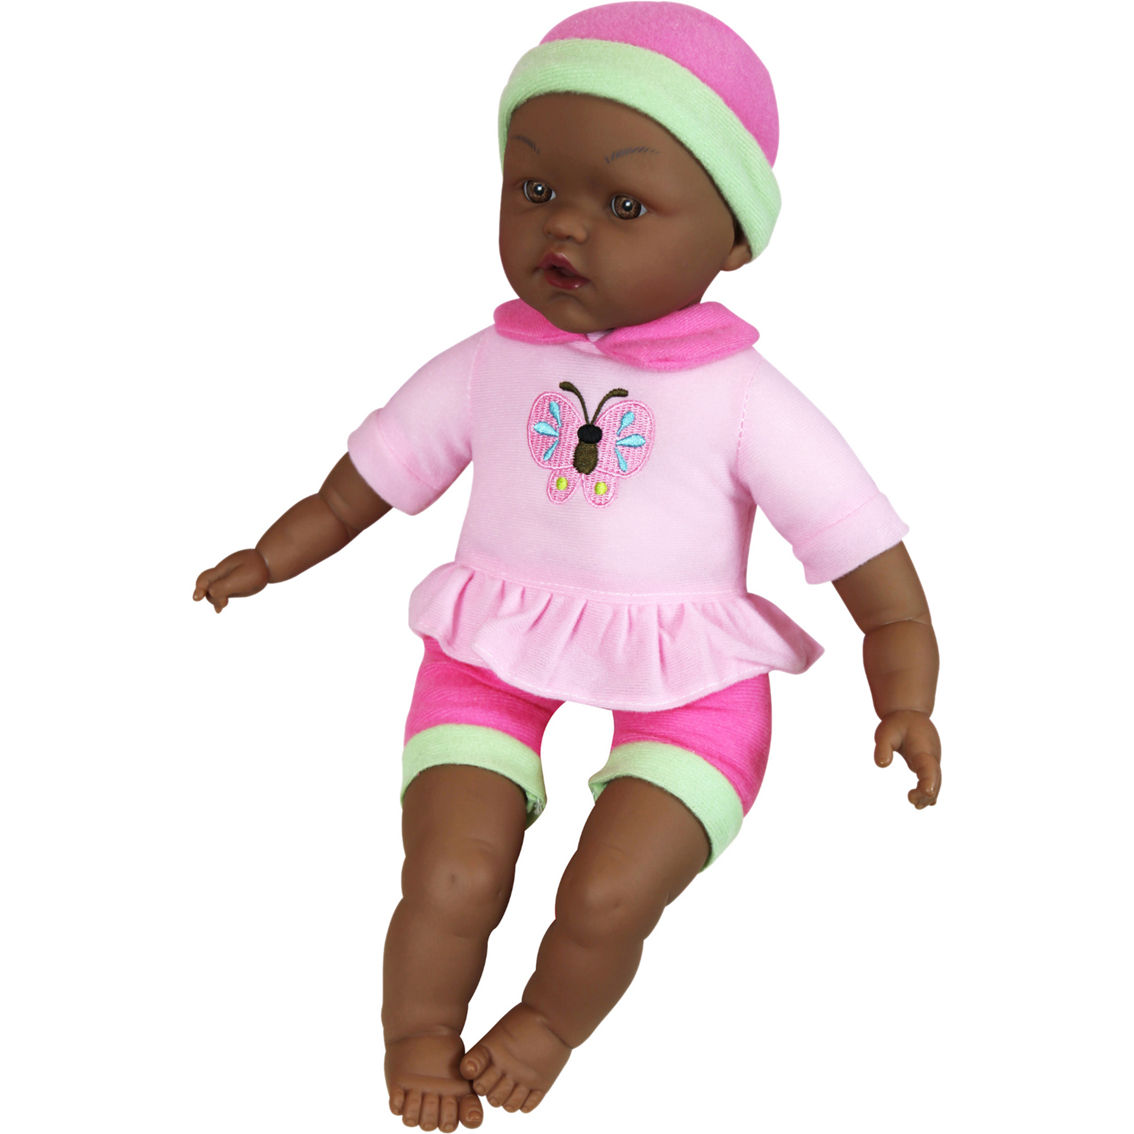 Lissi Doll Umbrella Stroller Set with 16 in. African-American Doll - Image 3 of 4